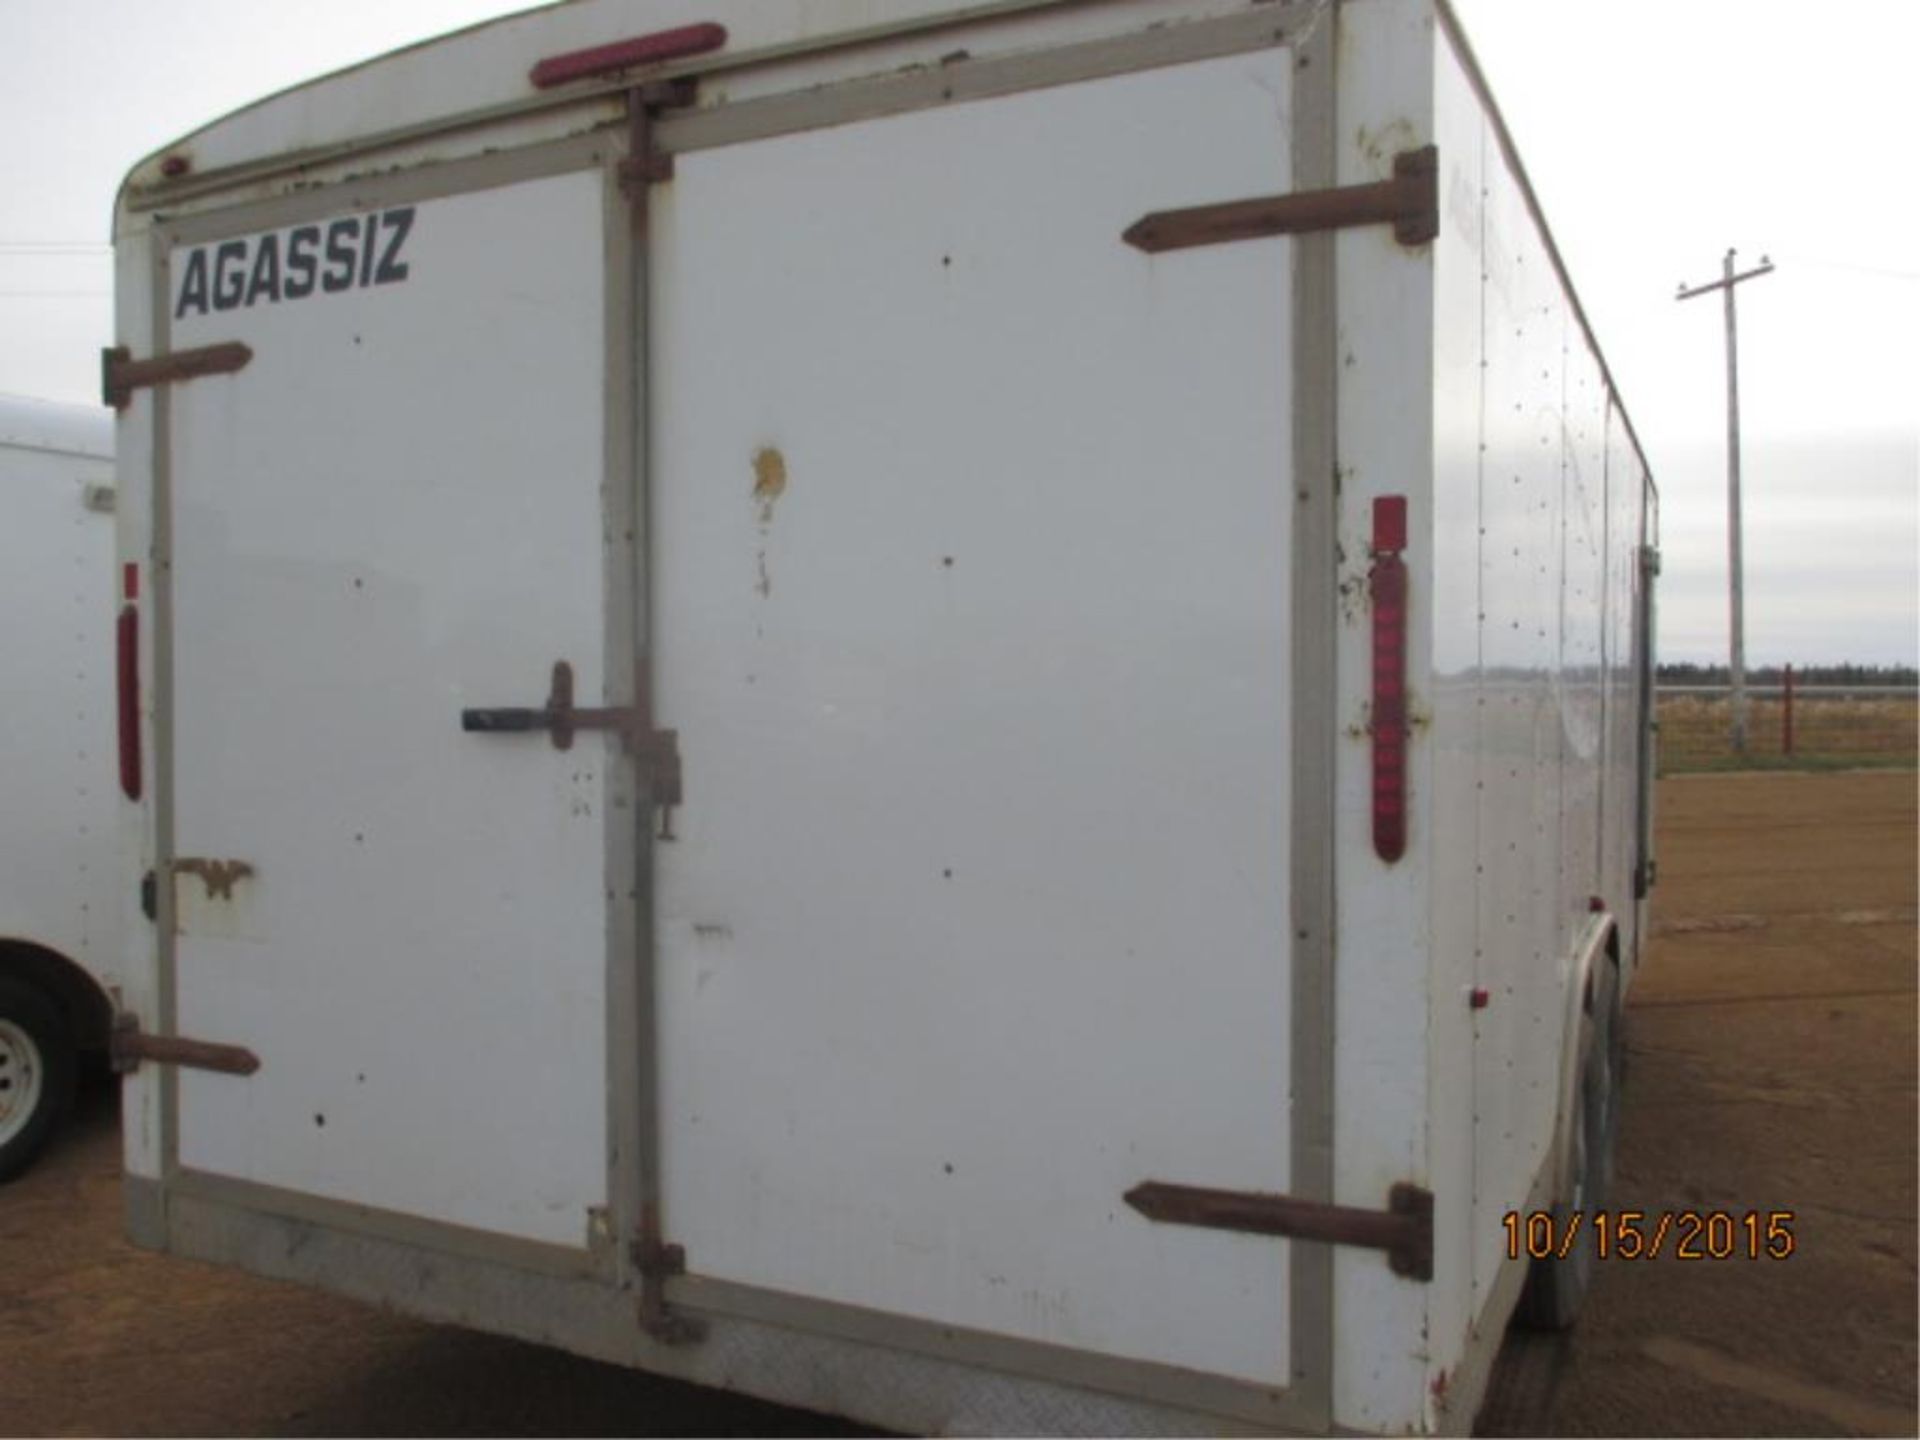 2006 T/A Aggasi Enclosed Trailer 20FT X 8FT 7,000lb axles, (Some Roof Damage) VIN - Image 5 of 8